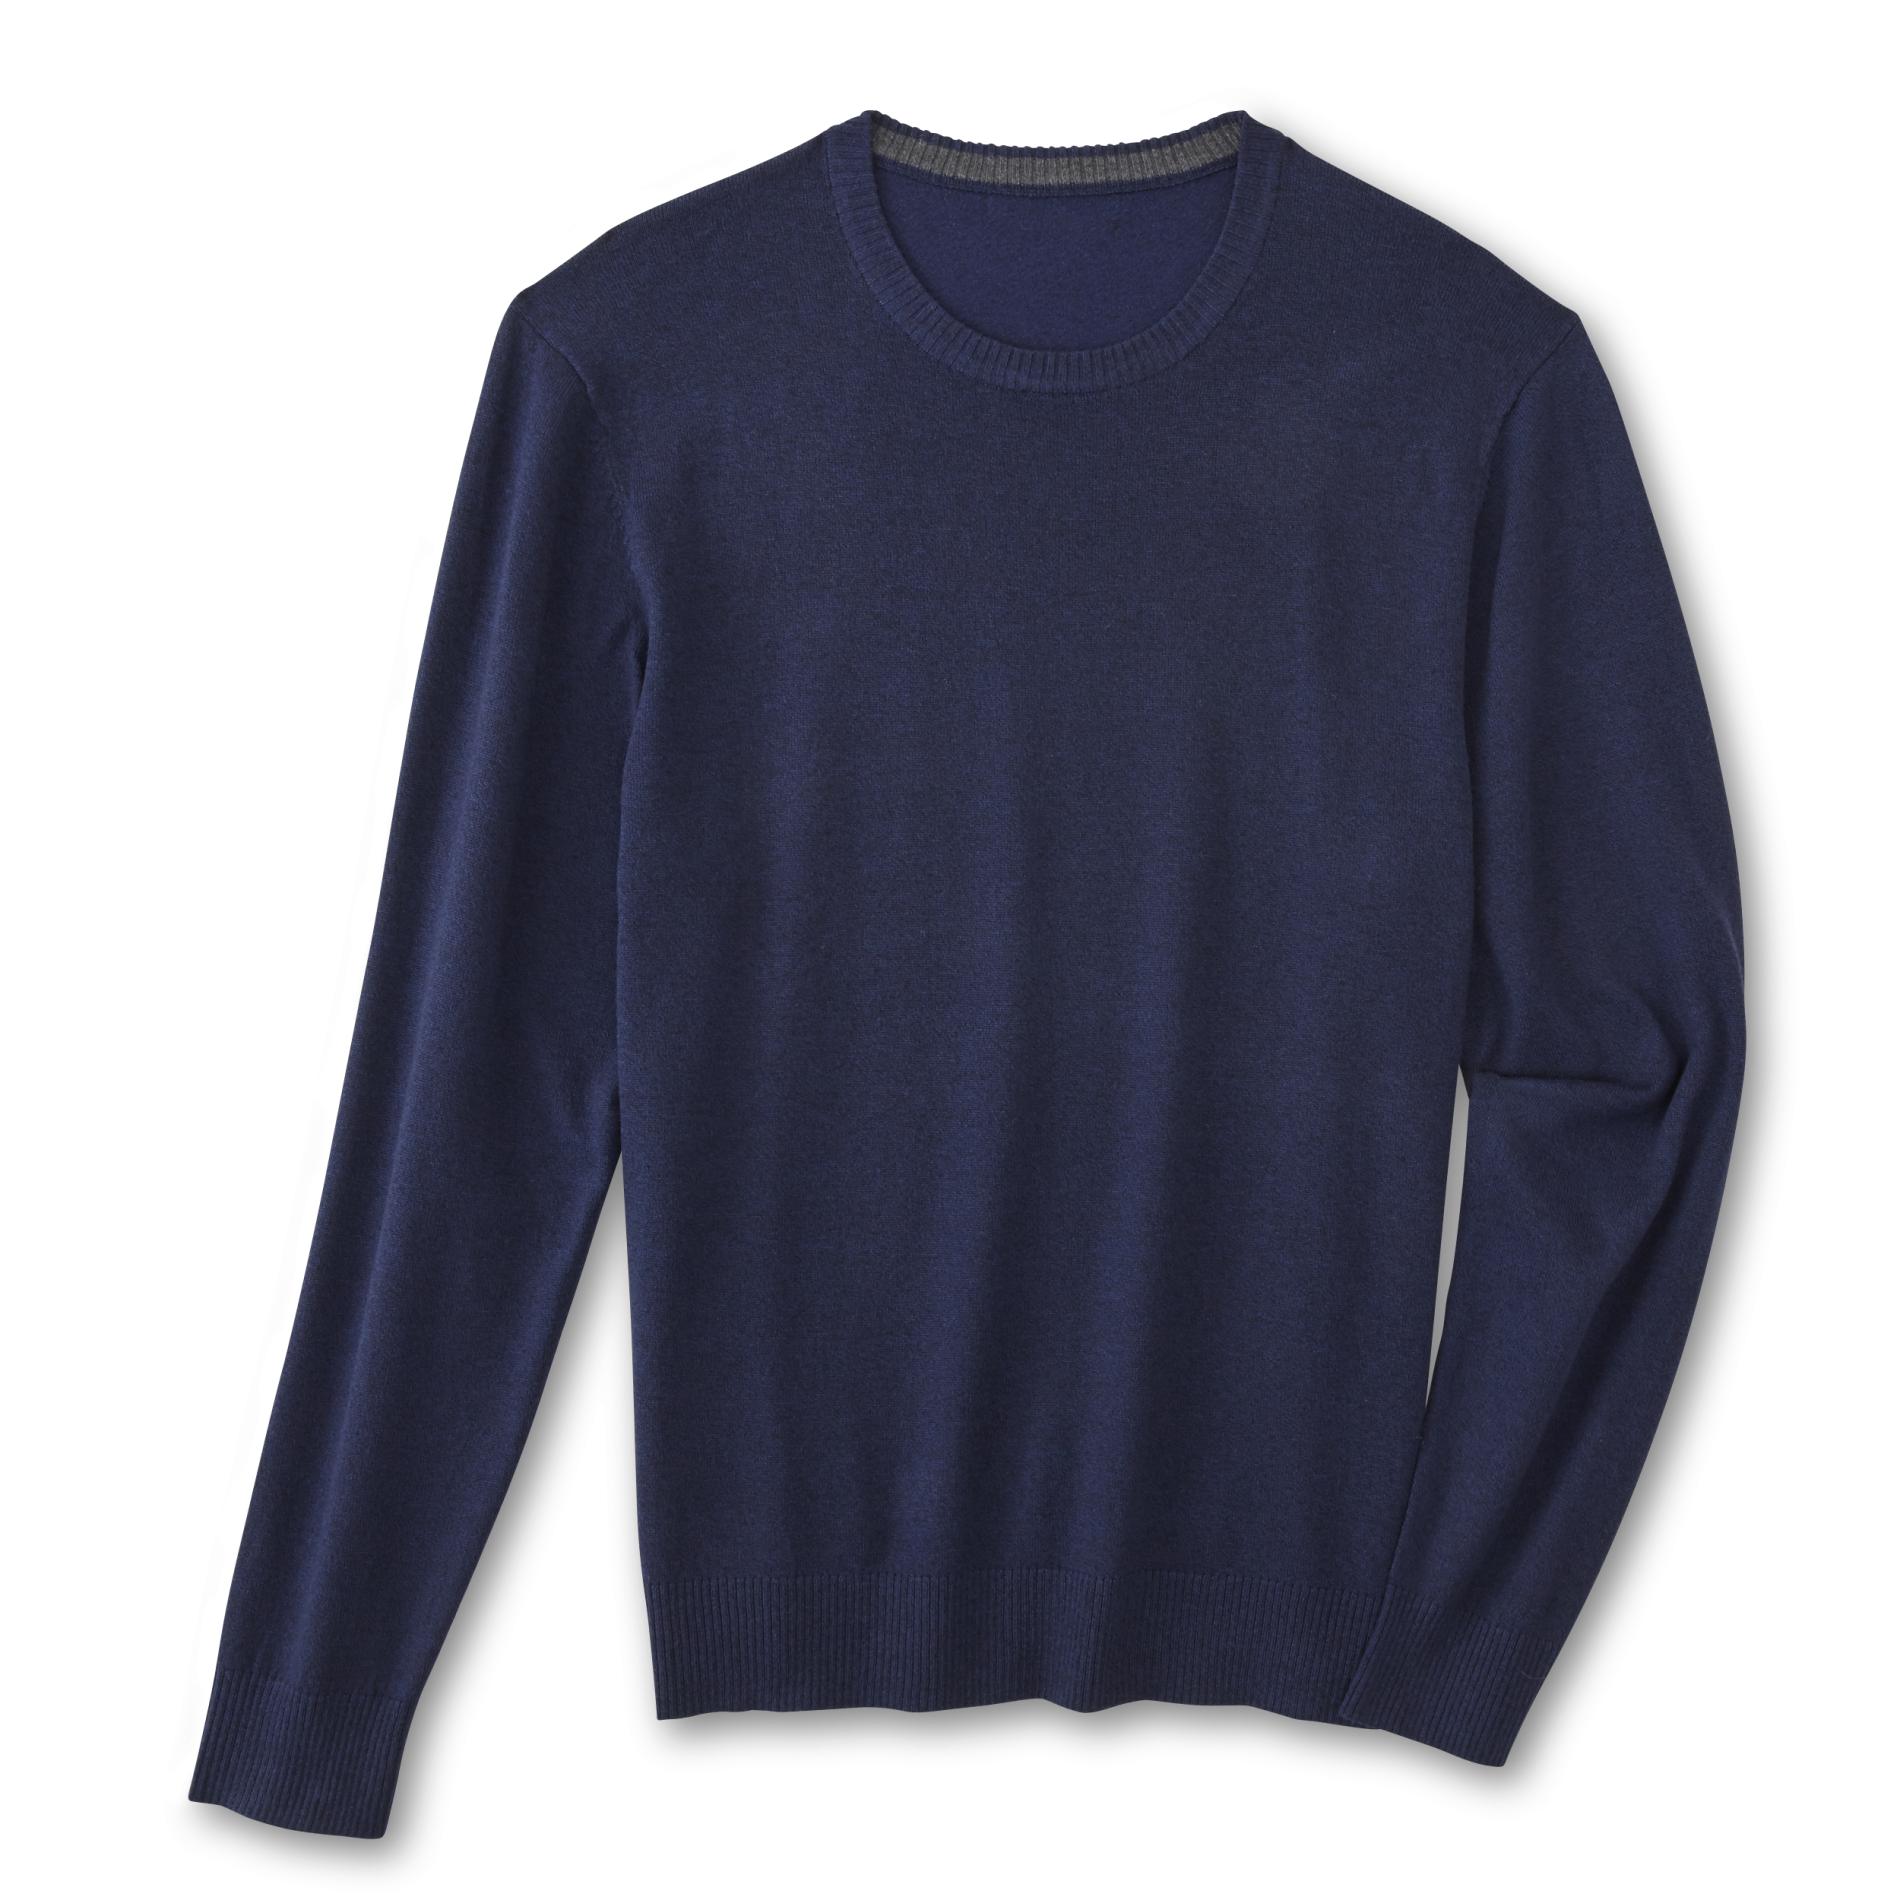 Simply Styled Men's Crew Neck Sweater